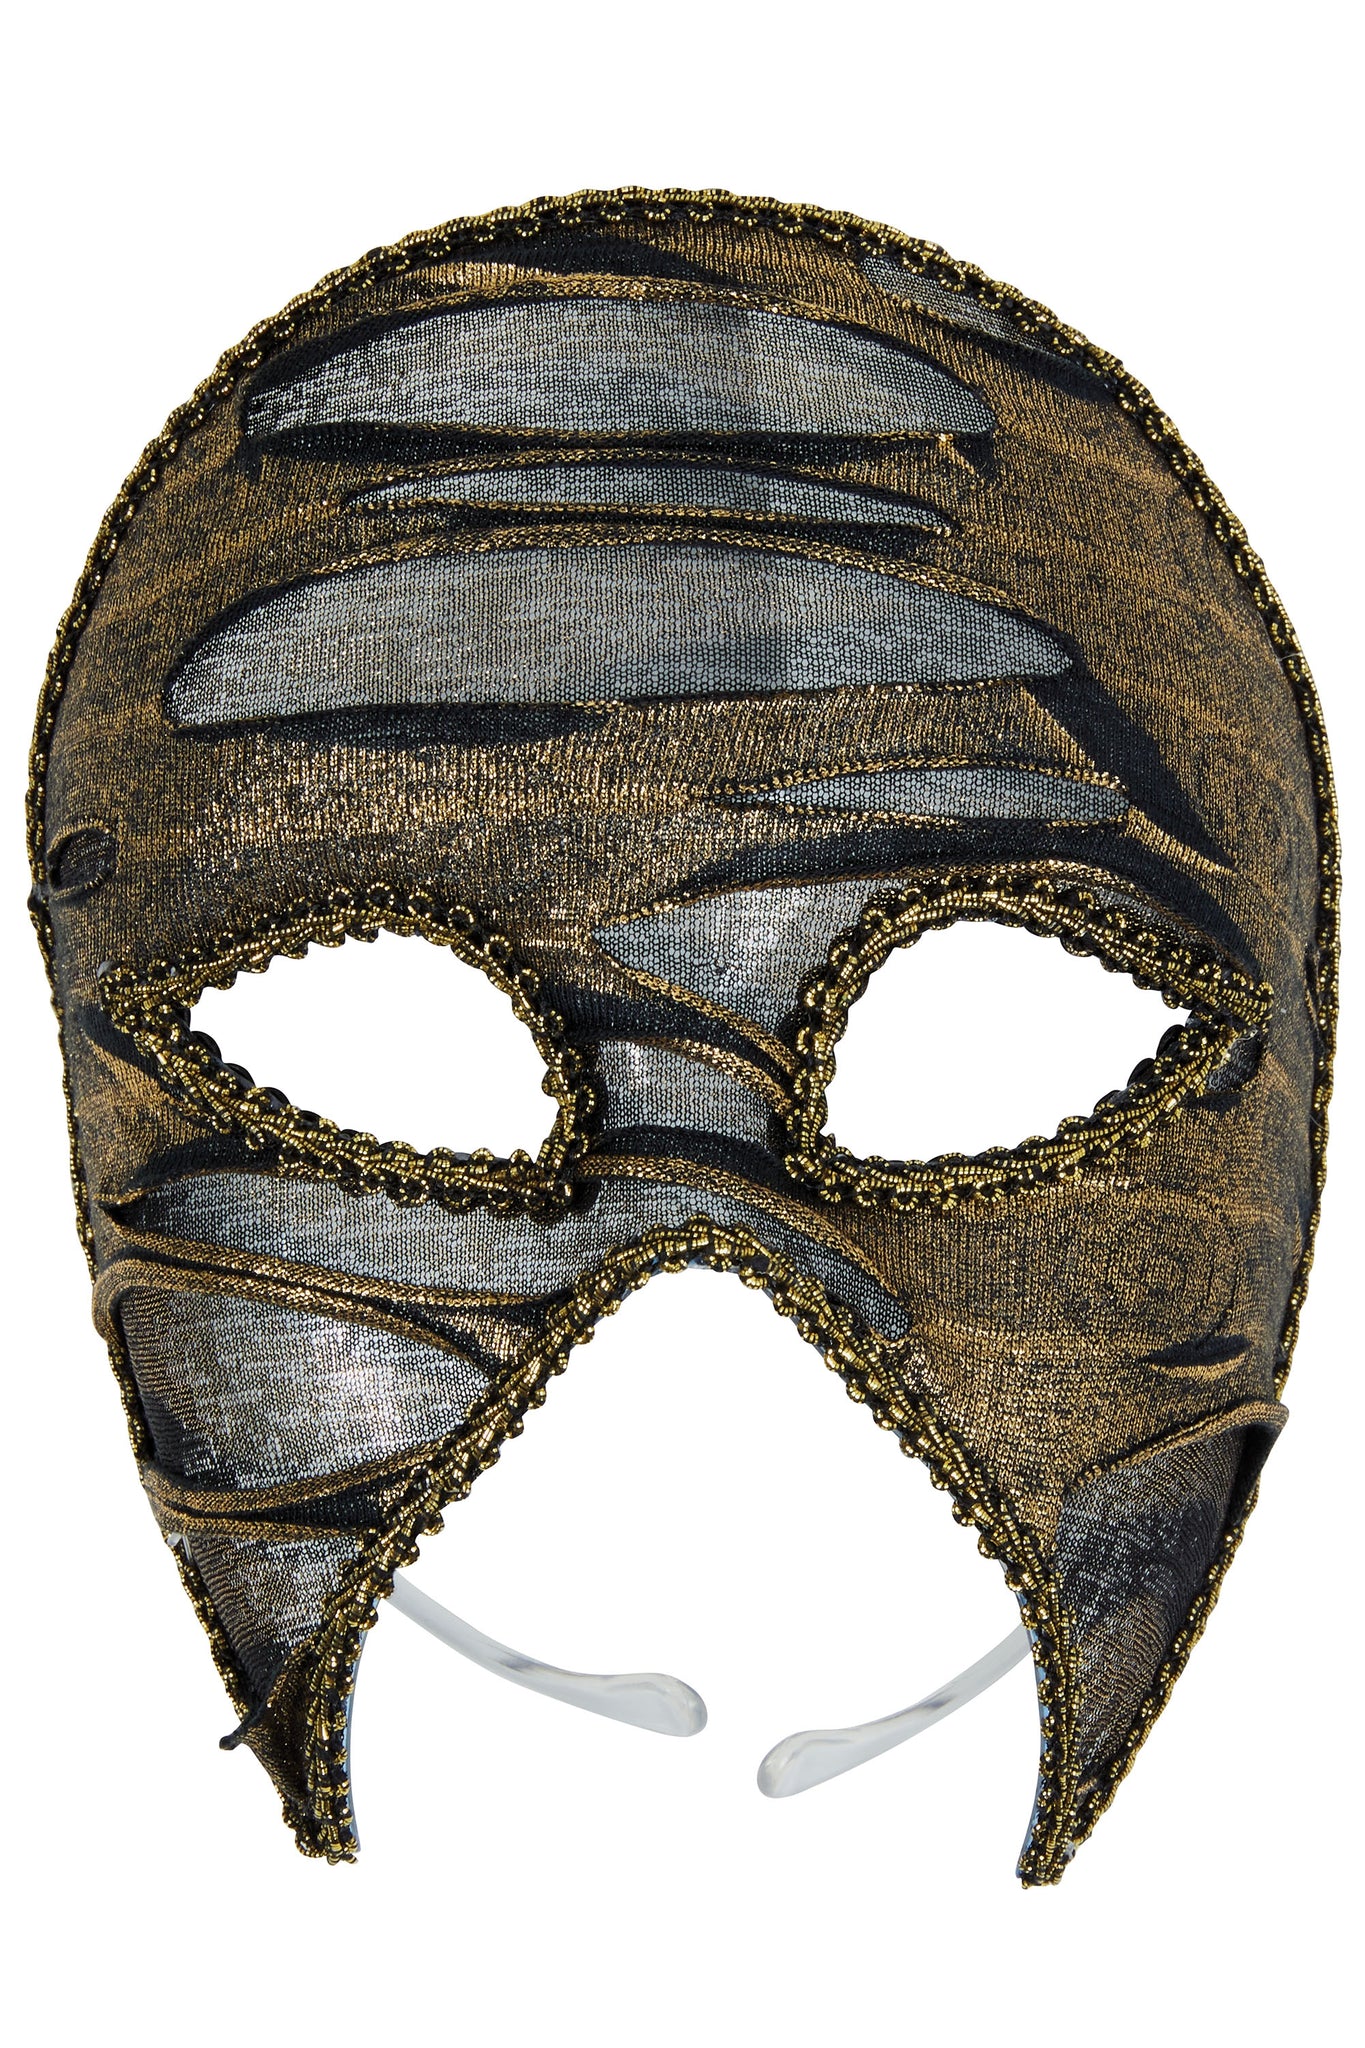 Gold & Black Ripped Look Eye Mask